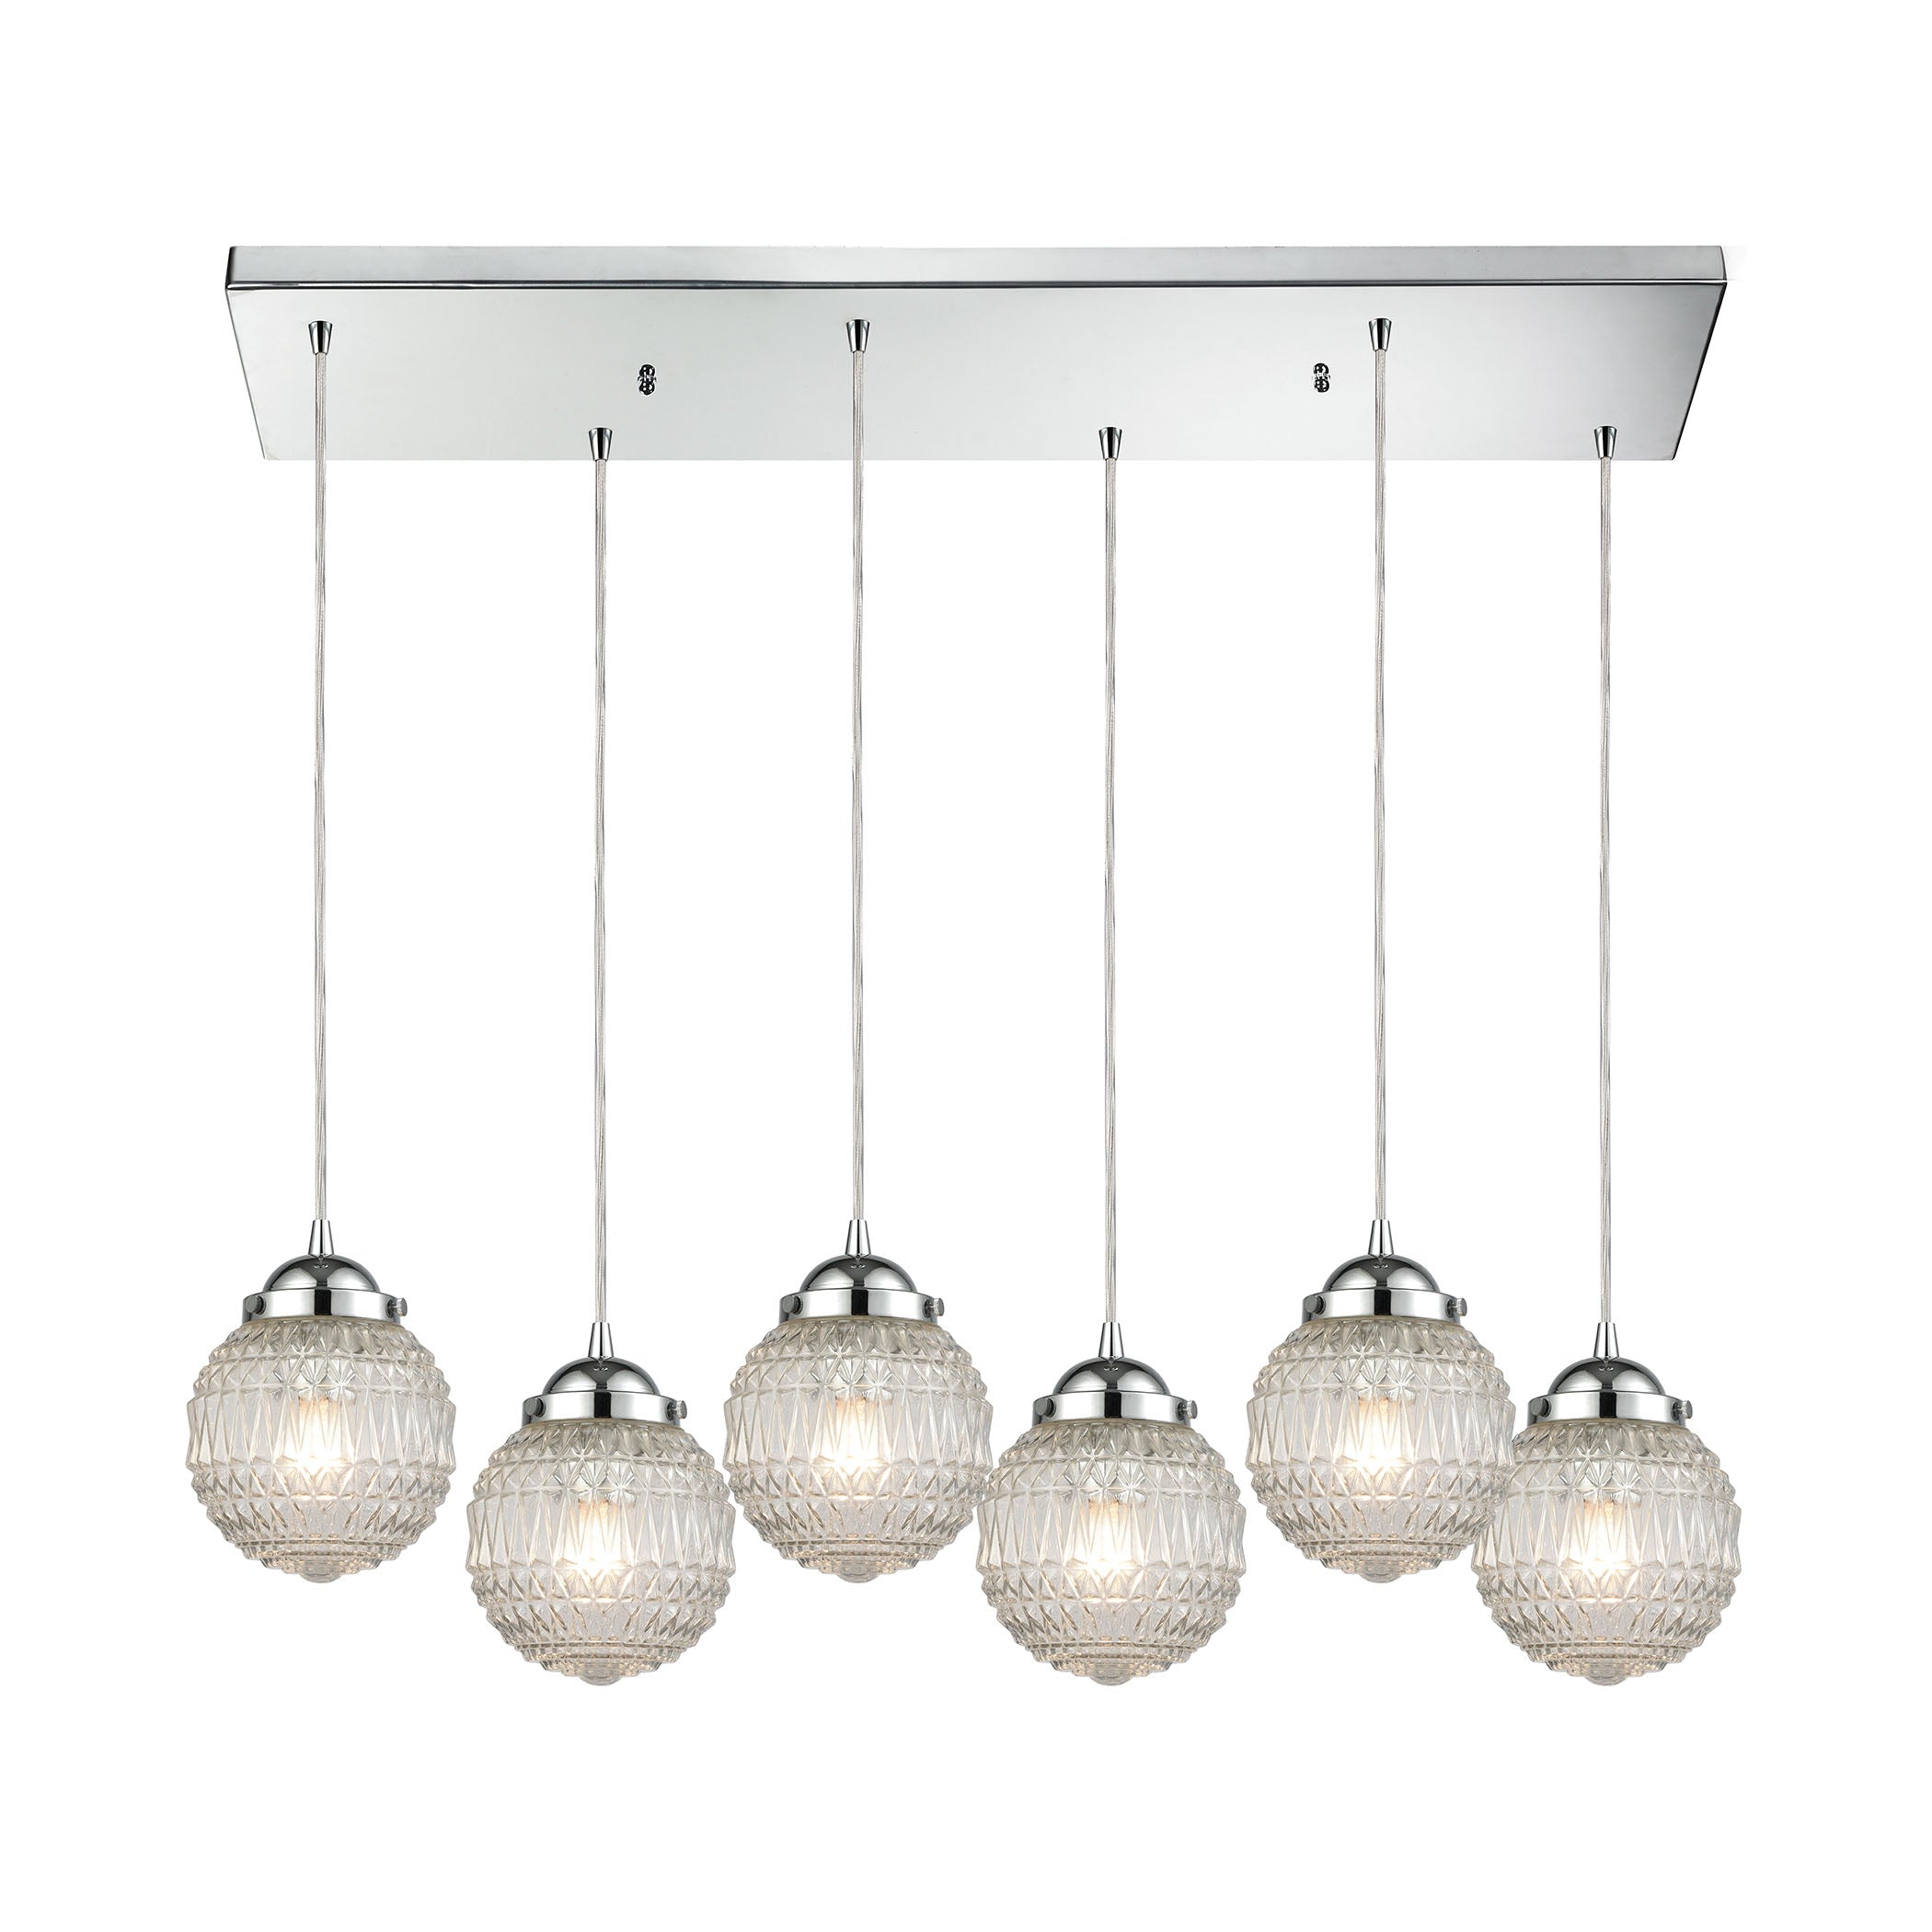 ELK Lighting 56591/6RC Victoriana 6-Light Rectangular Pendant Fixture in Polished Chrome with Clear Patterned Glass